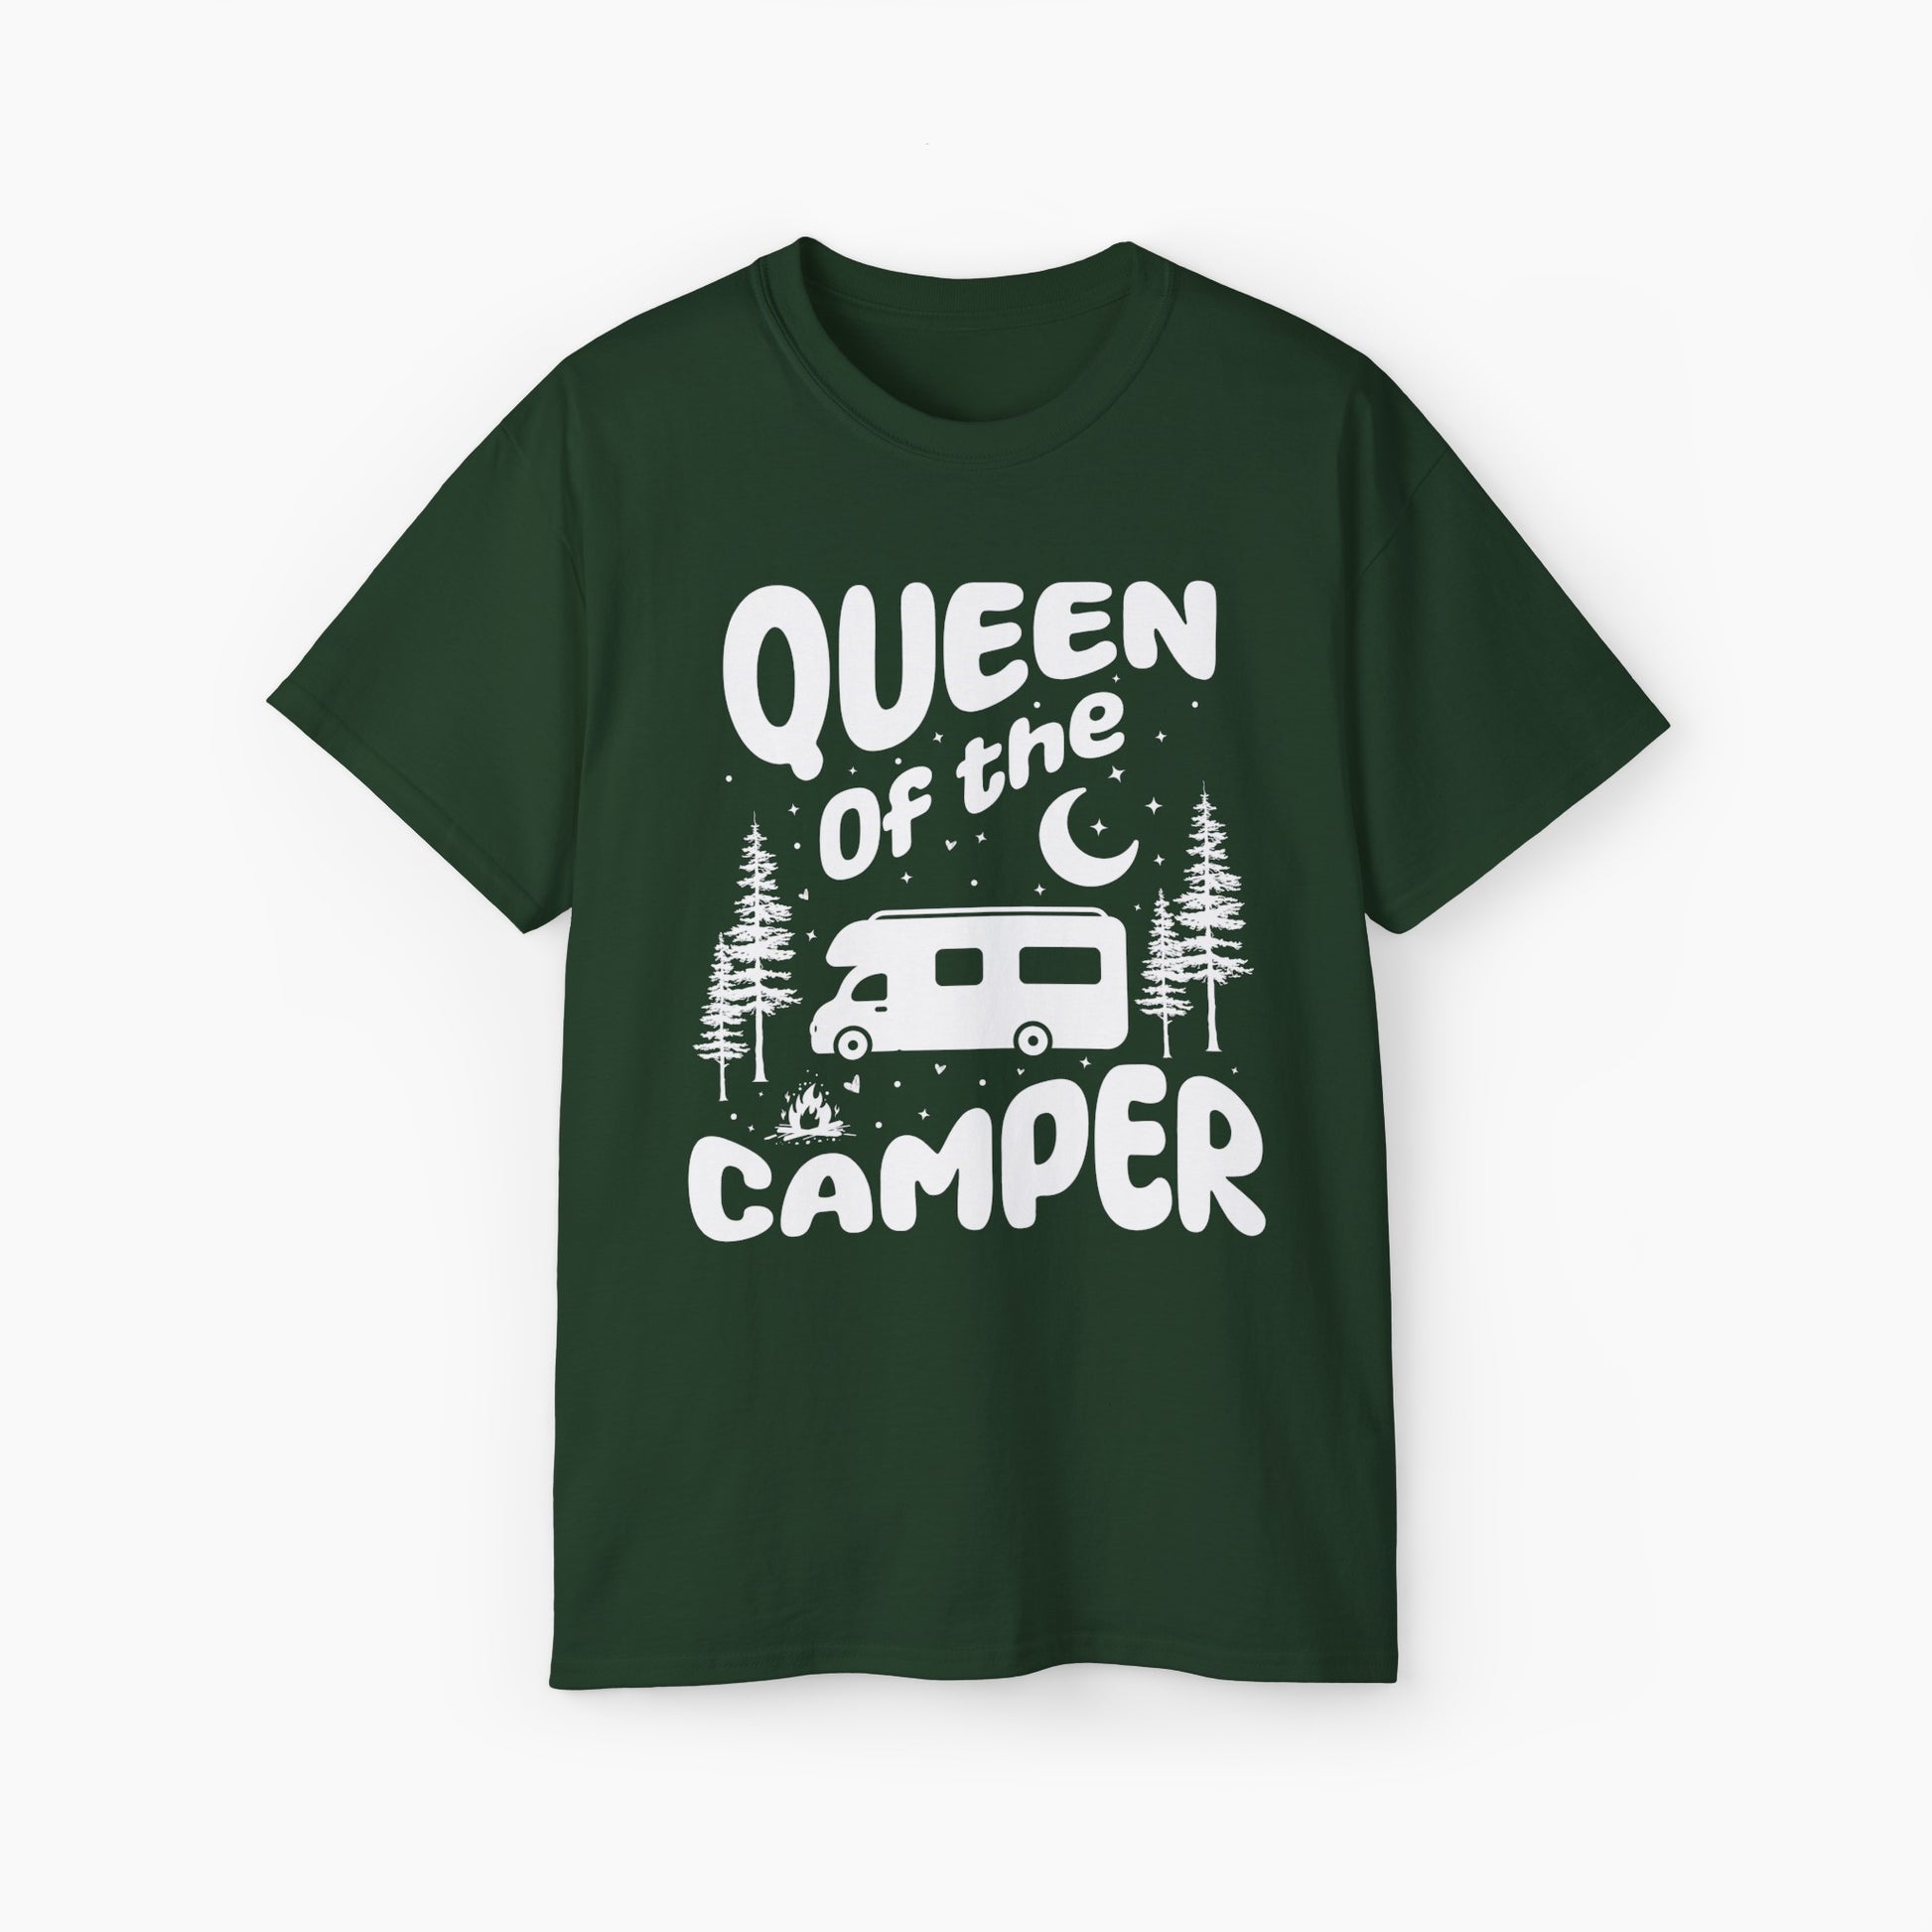 Green t-shirt with 'Camping Queen' text, illustrated with a camping van, stars, trees, campfire, and moon, on a plain background.